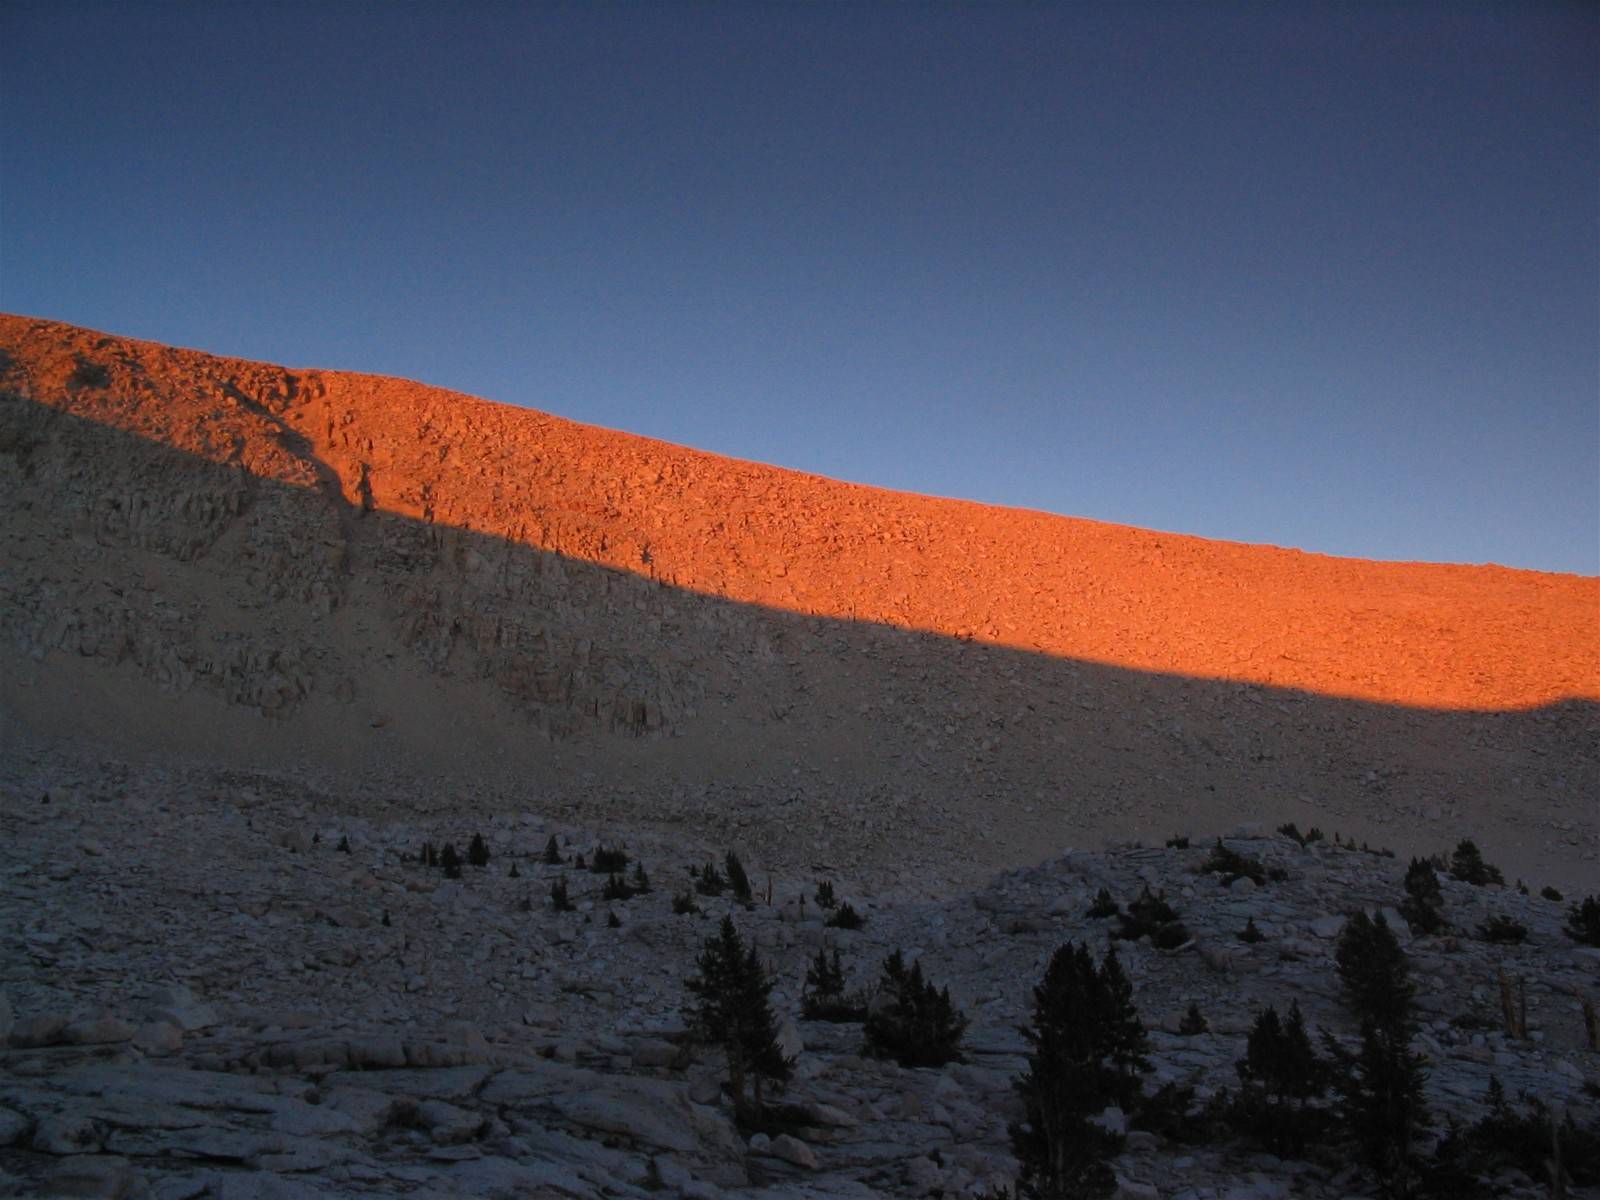 Sunset color bands on ridges above lake near southern edge of Sequoia National Park